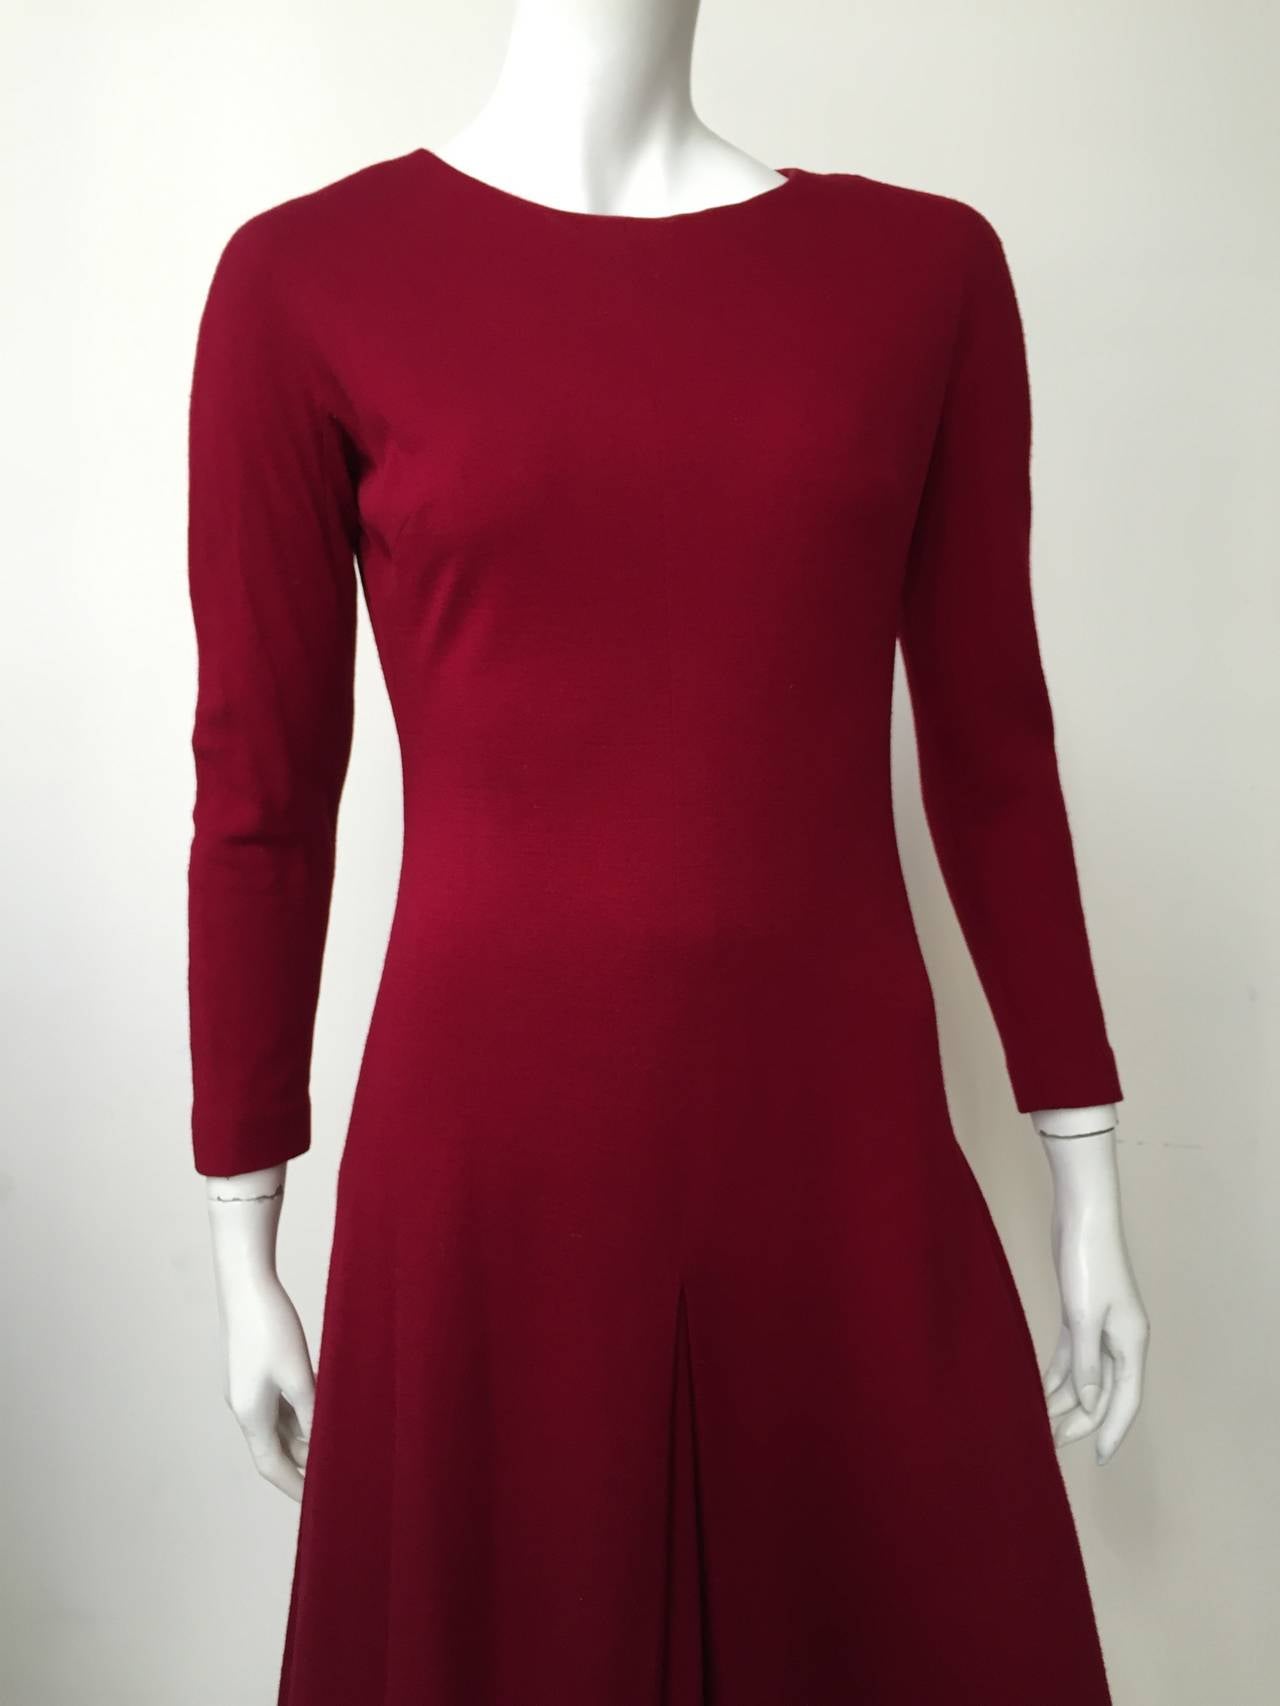 Anne Fogarty 60s wool cut to bodice dress is an excellent example of the craftsmanship of Anne Fogarty and what she was best known for.  
Size 6. 
Ladies please use your measuring tape to properly measure your bust, waist & hips to make certain